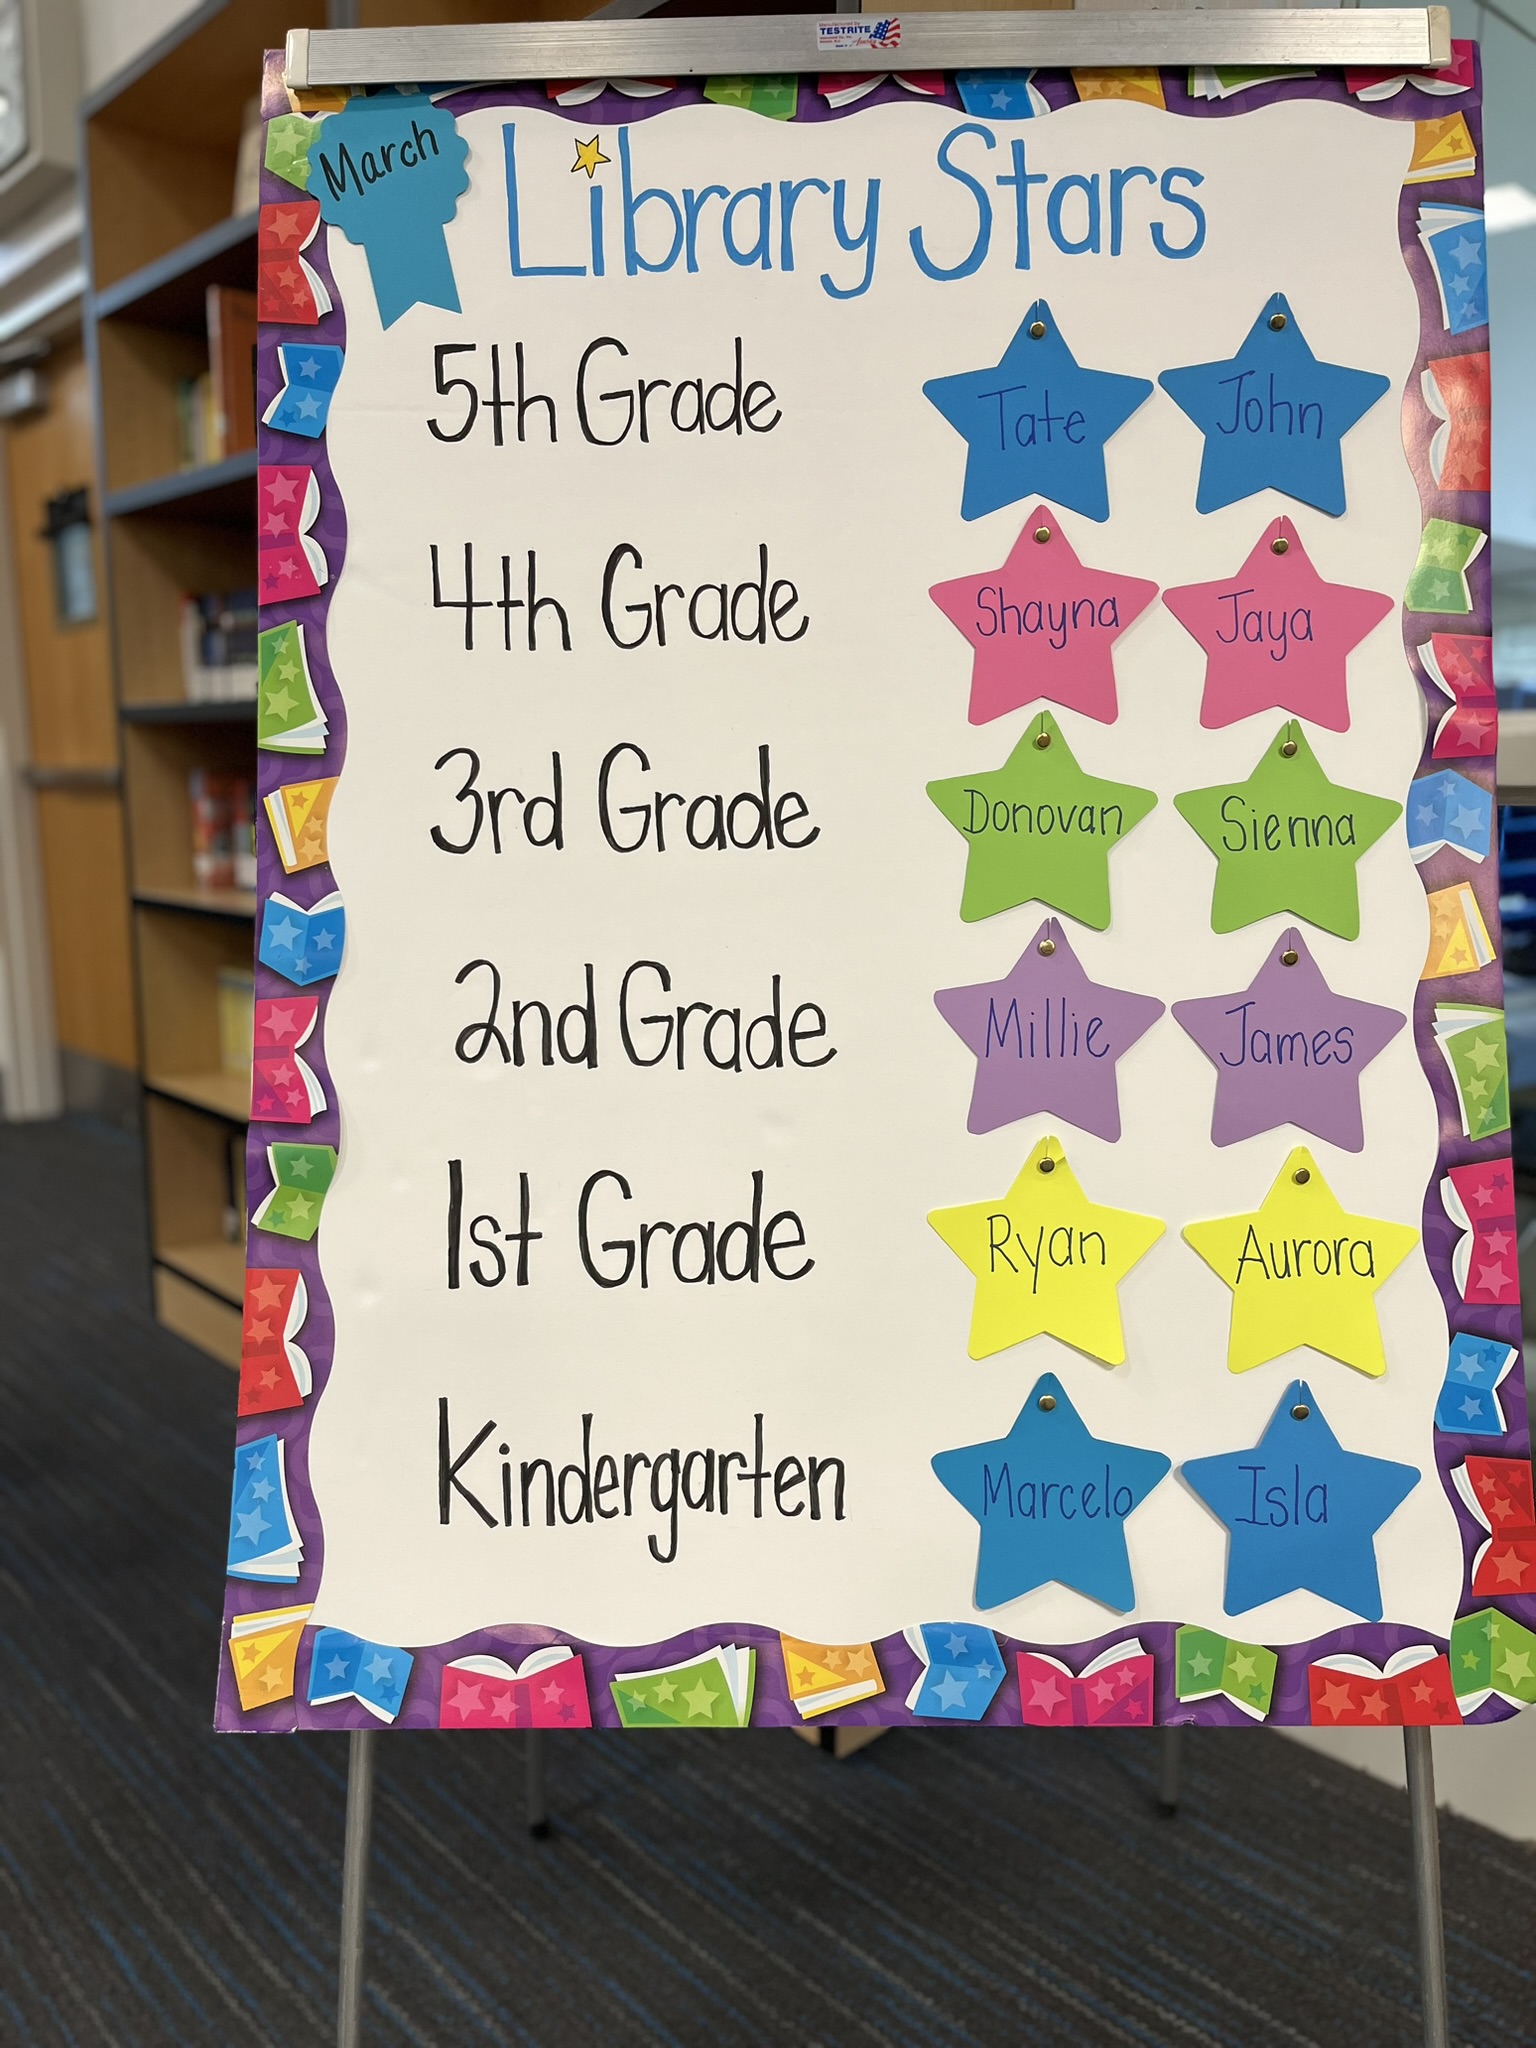 March Library Stars